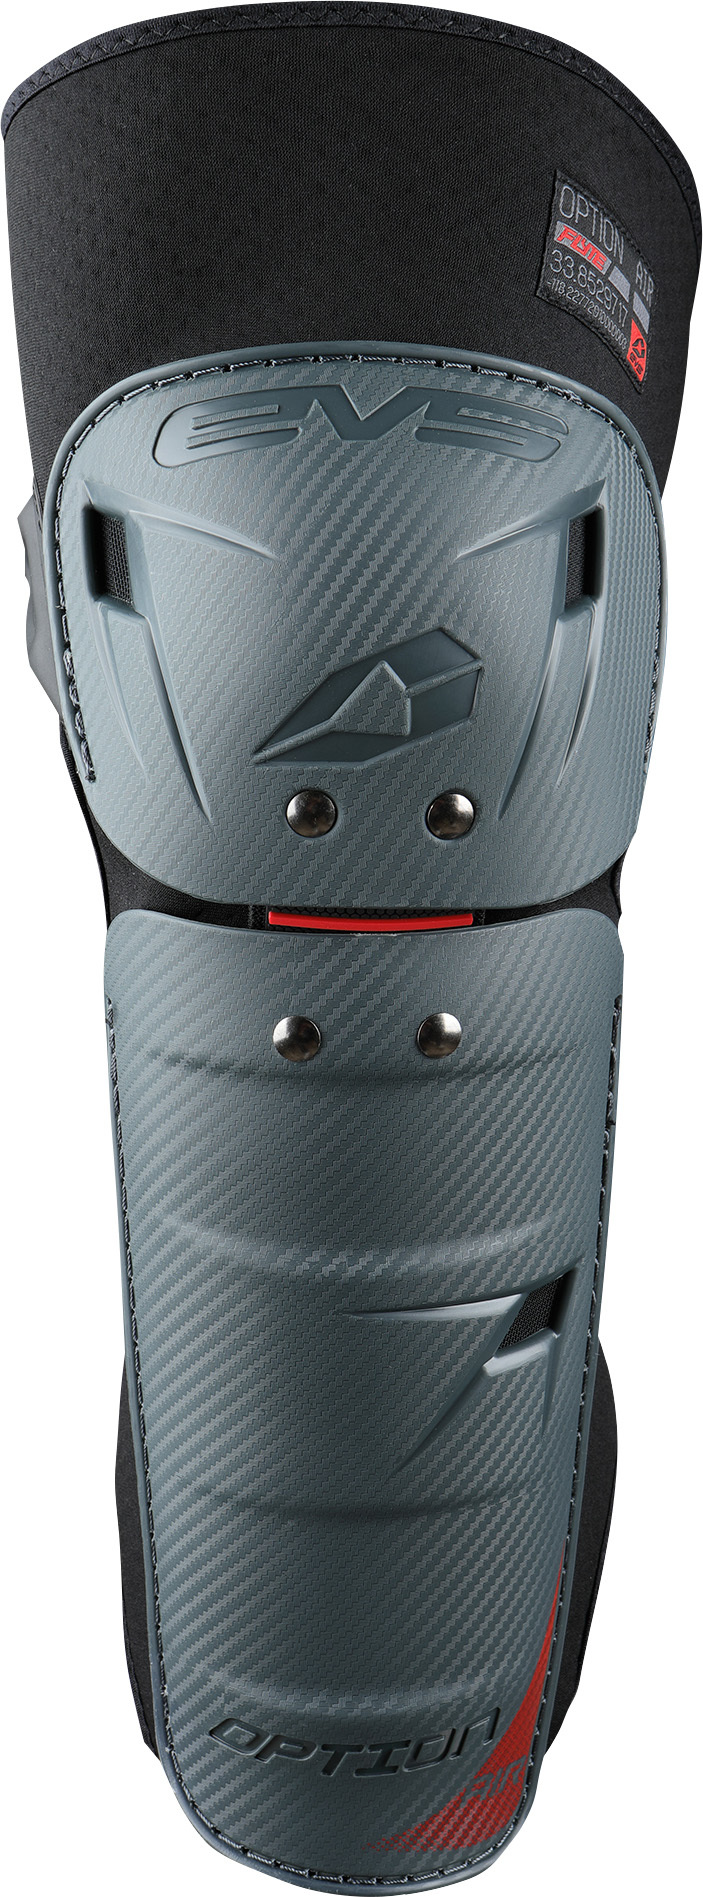 Option Air Knee Guards, Black, Adult One Size - Click Image to Close